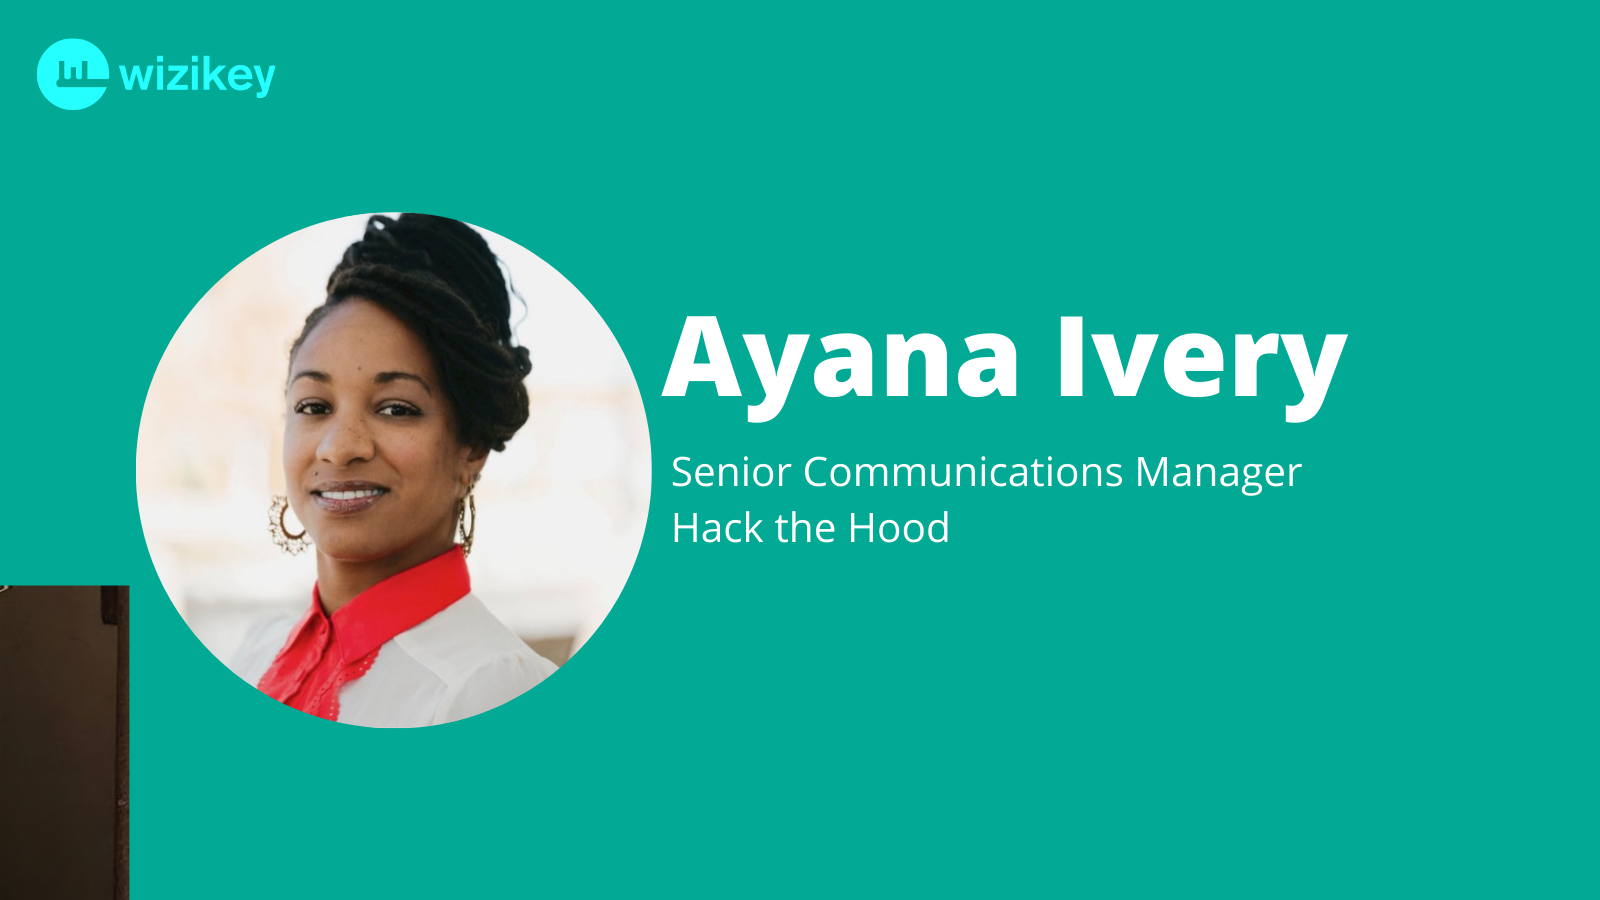 Data highlights your  achievements: Ayana from Hack the Hood